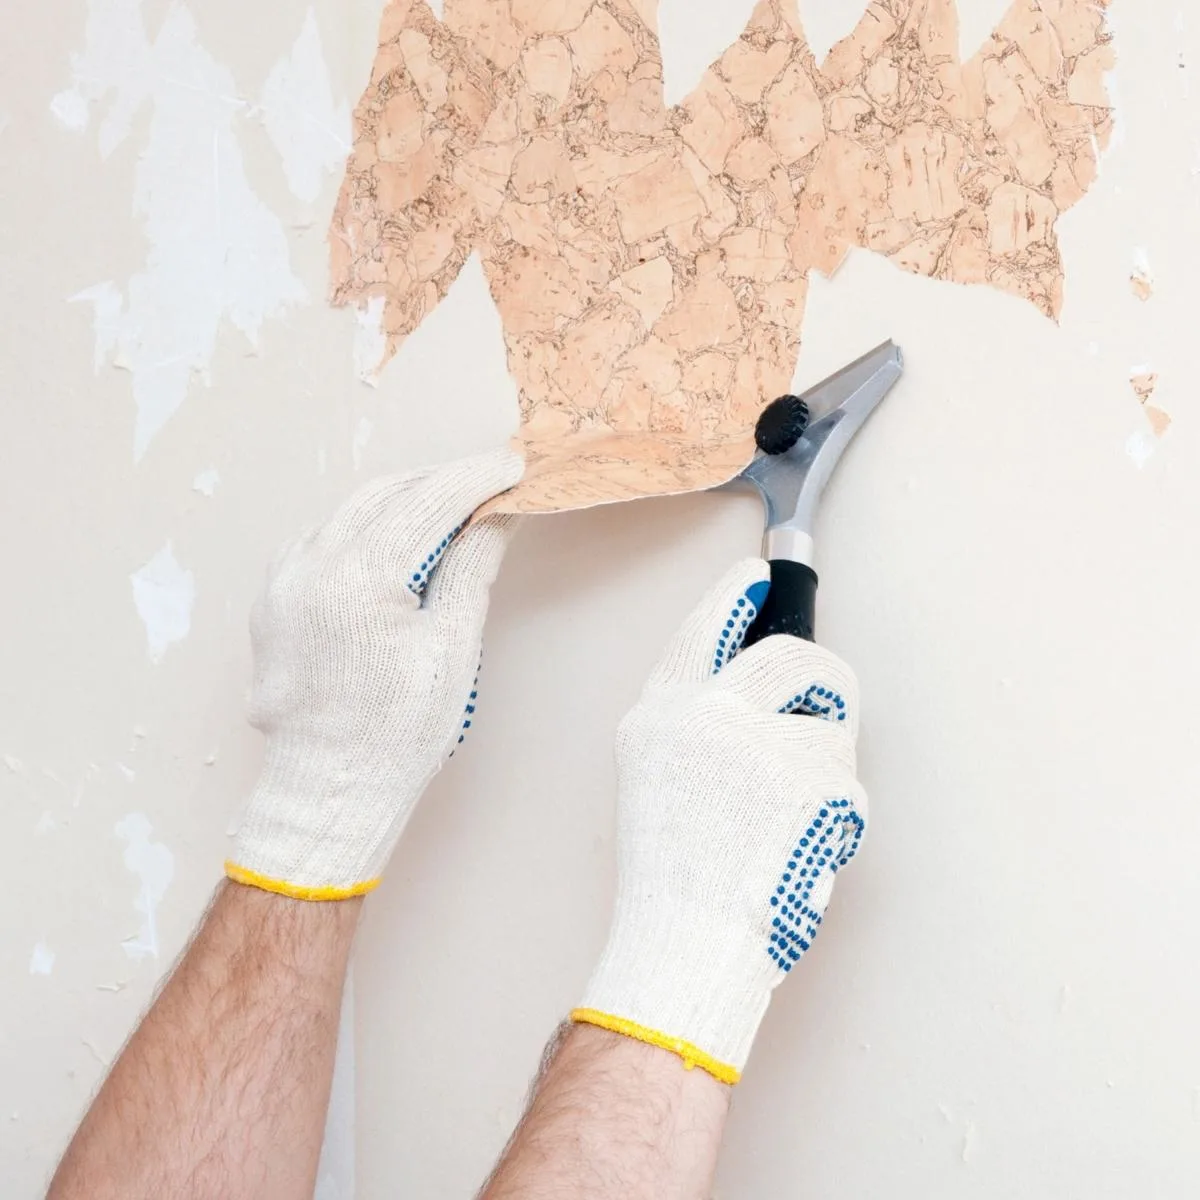 using a scraping tool to remove wallpaper